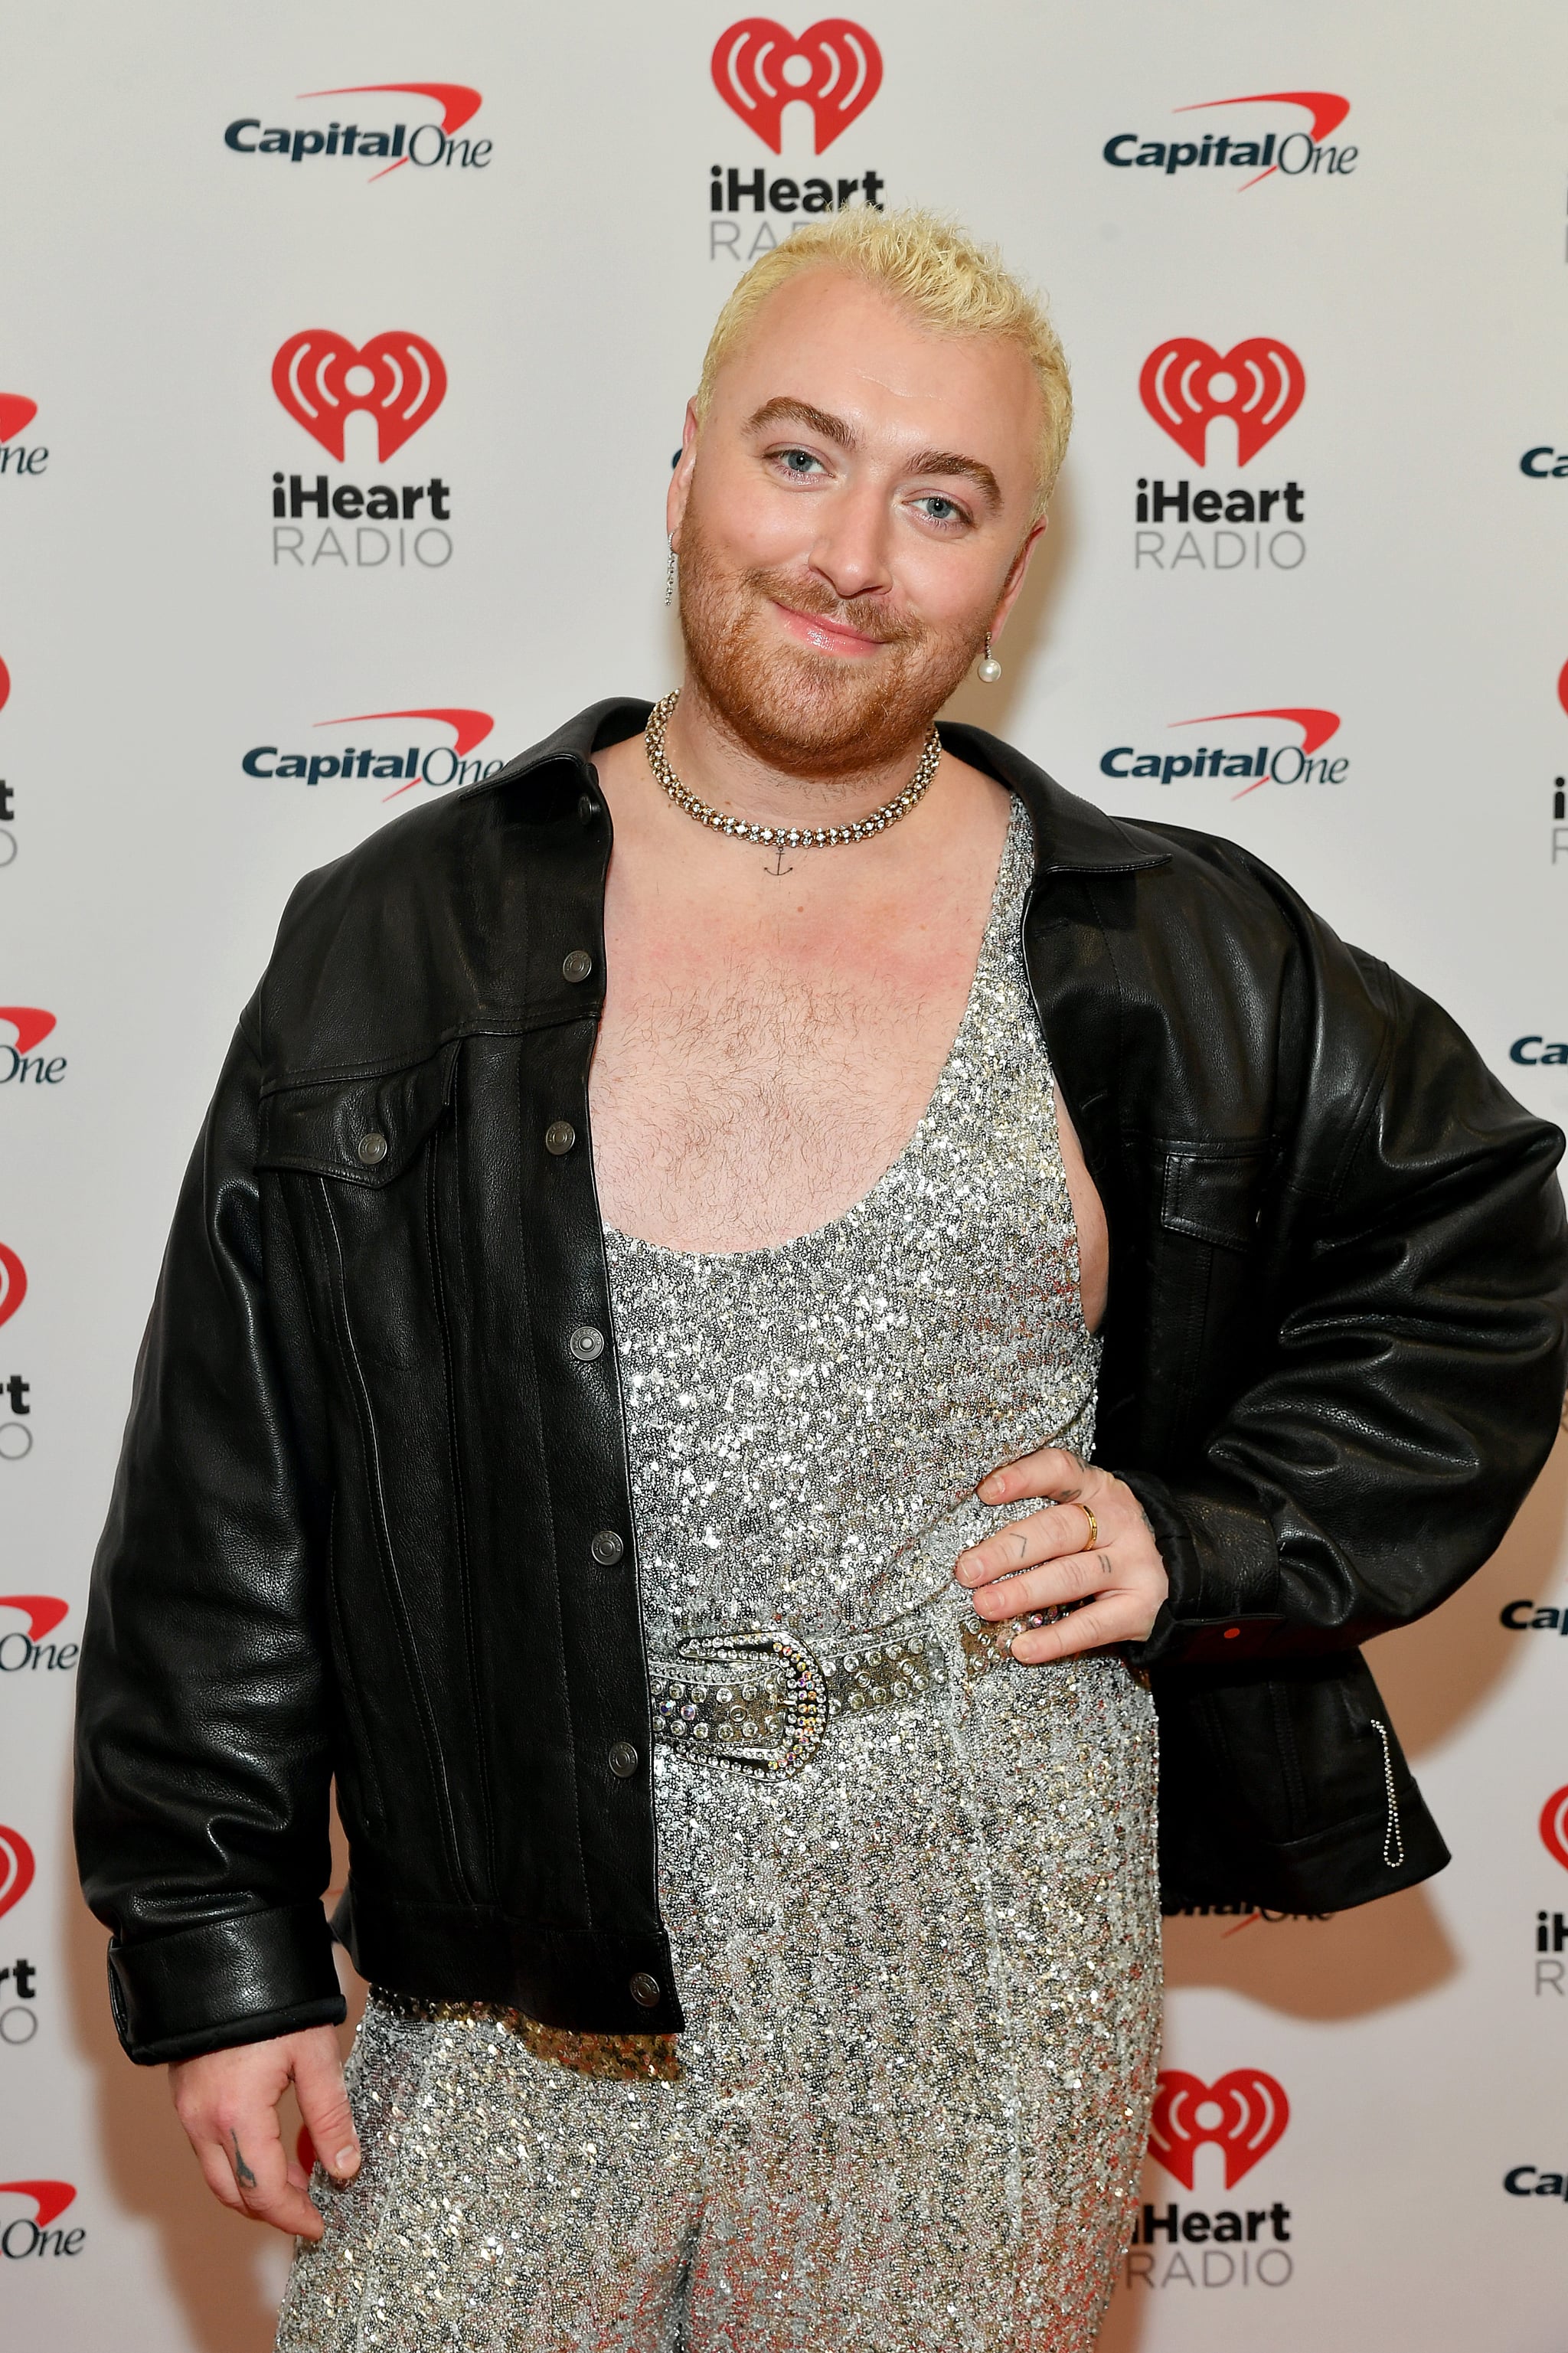 ATLANTA, GEORGIA - DECEMBER 15: Sam Smith attends iHeartRadio Power 96.1's Jingle Ball 2022 Presented by Capital One at State Farm Arena on December 15, 2022 in Atlanta, Georgia. (Photo by Paras Griffin/Getty Images for iHeartRadio)